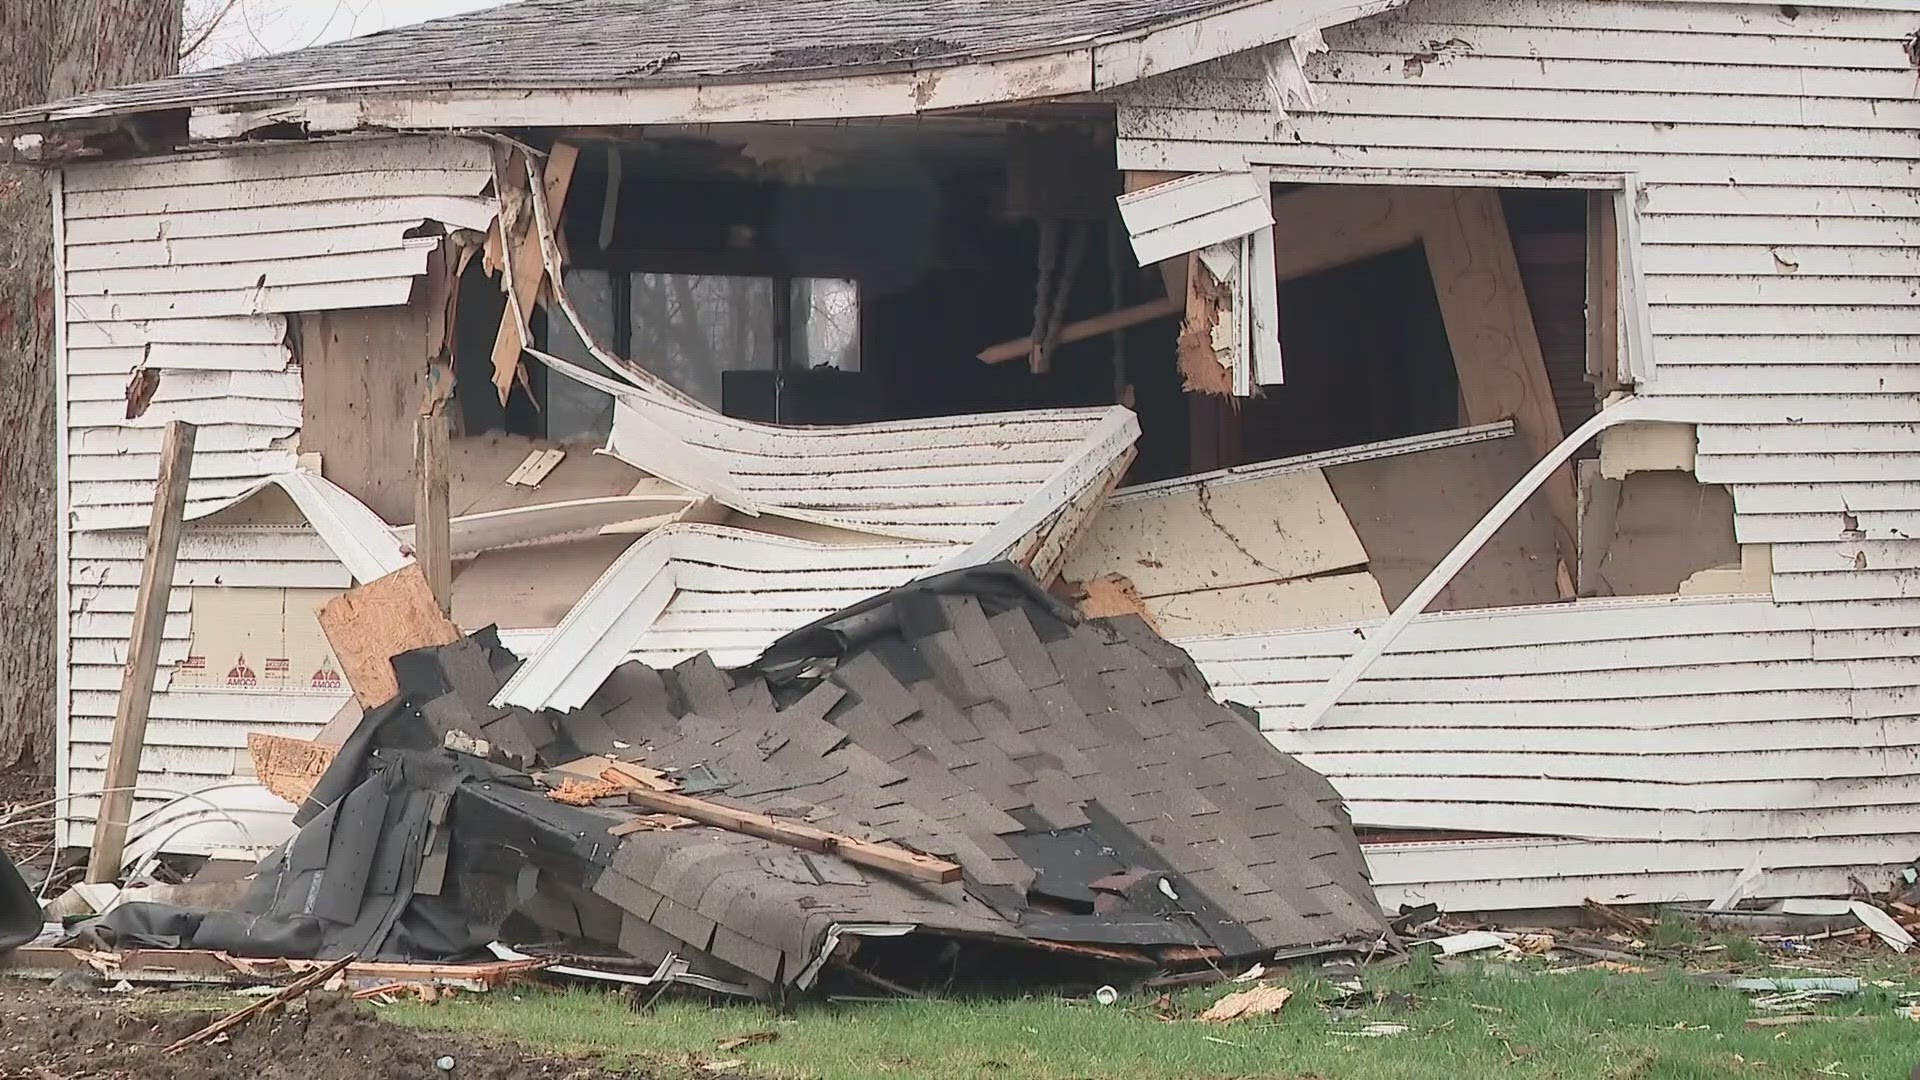 The United Way of Logan County has collected $1.1 million in donations since the tornado on March 14.